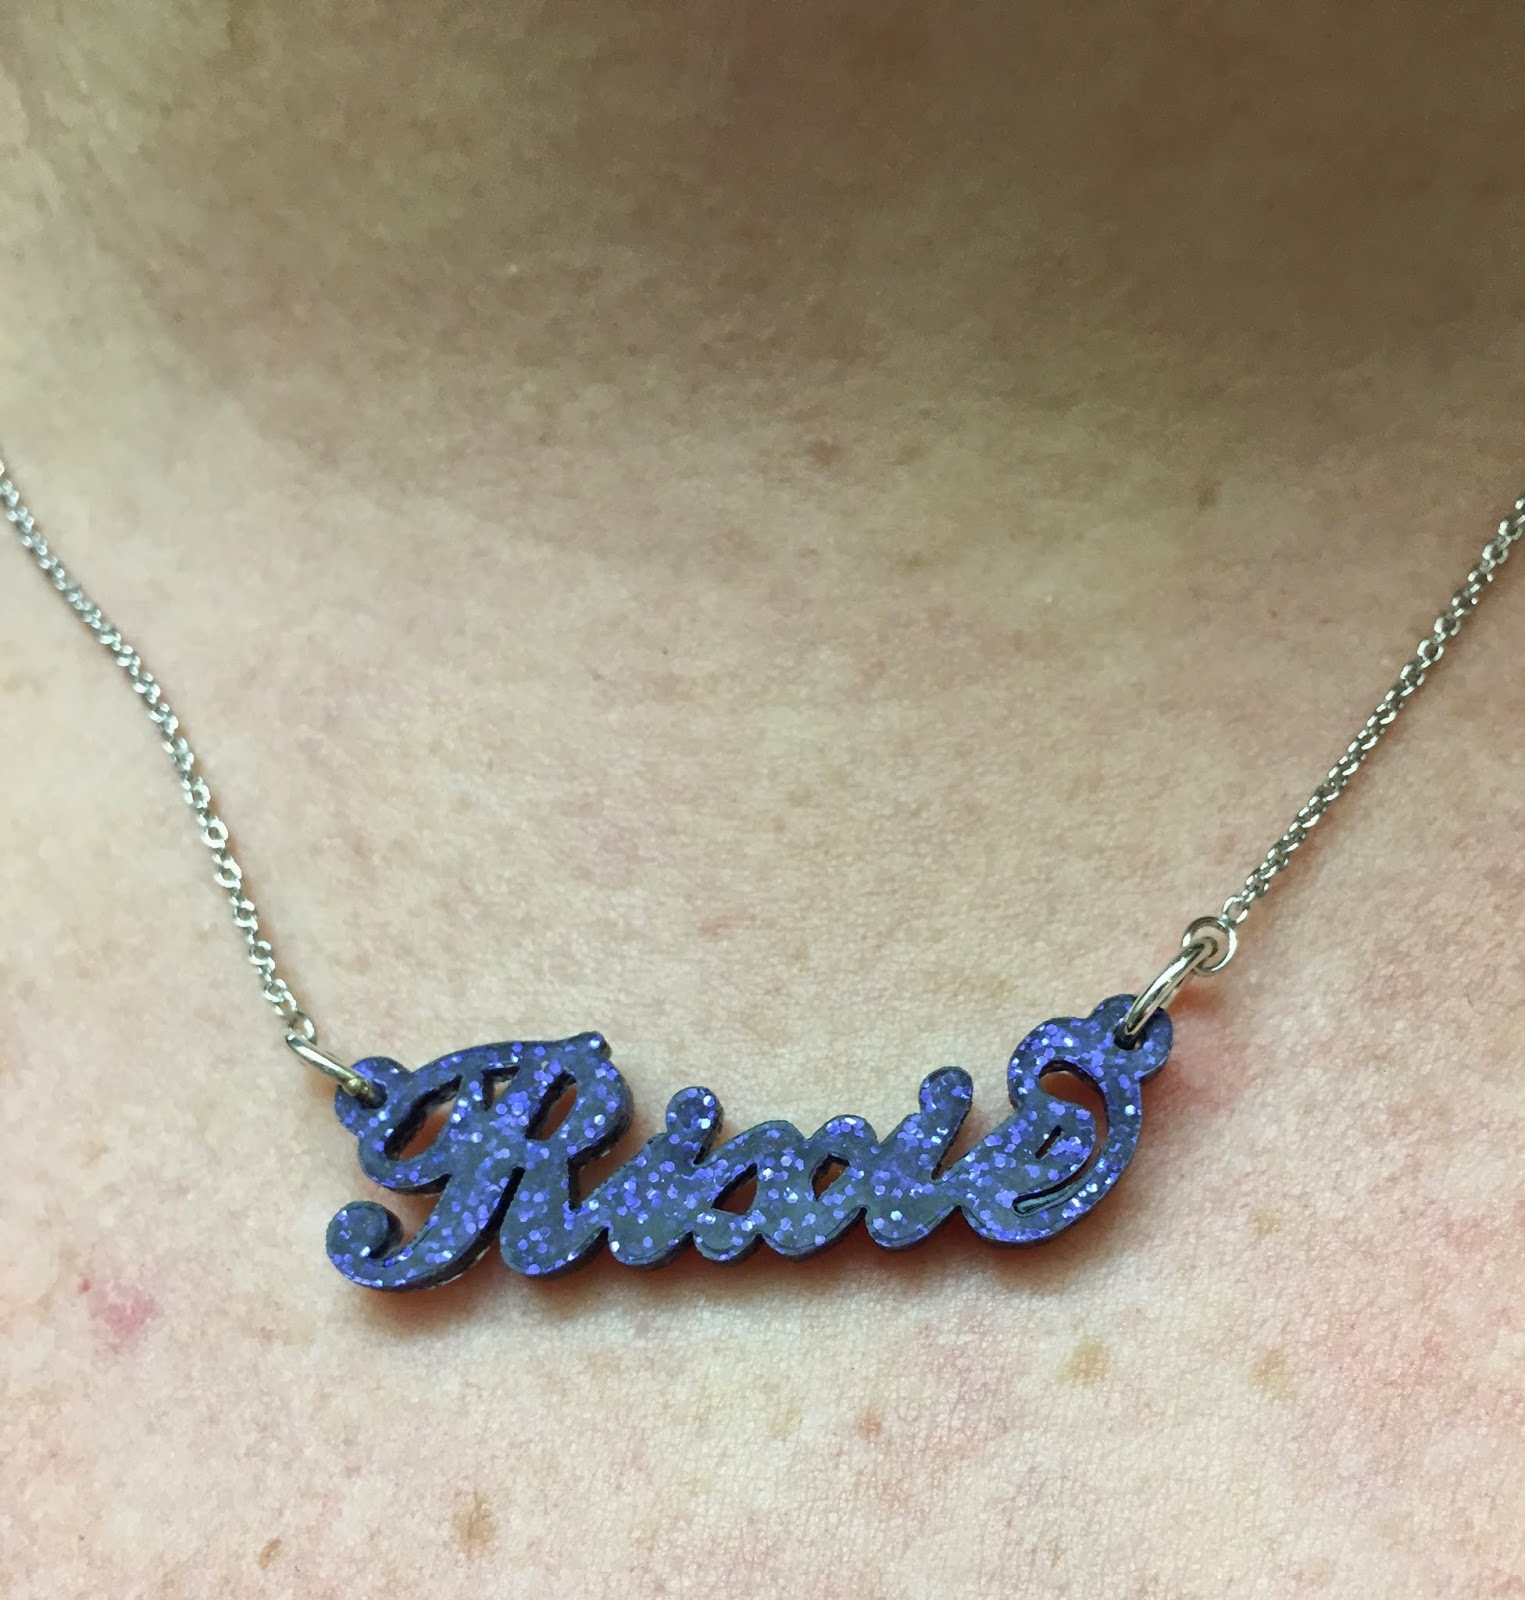 Eve's Addiction Acrylic Necklace Review | RixiePixie